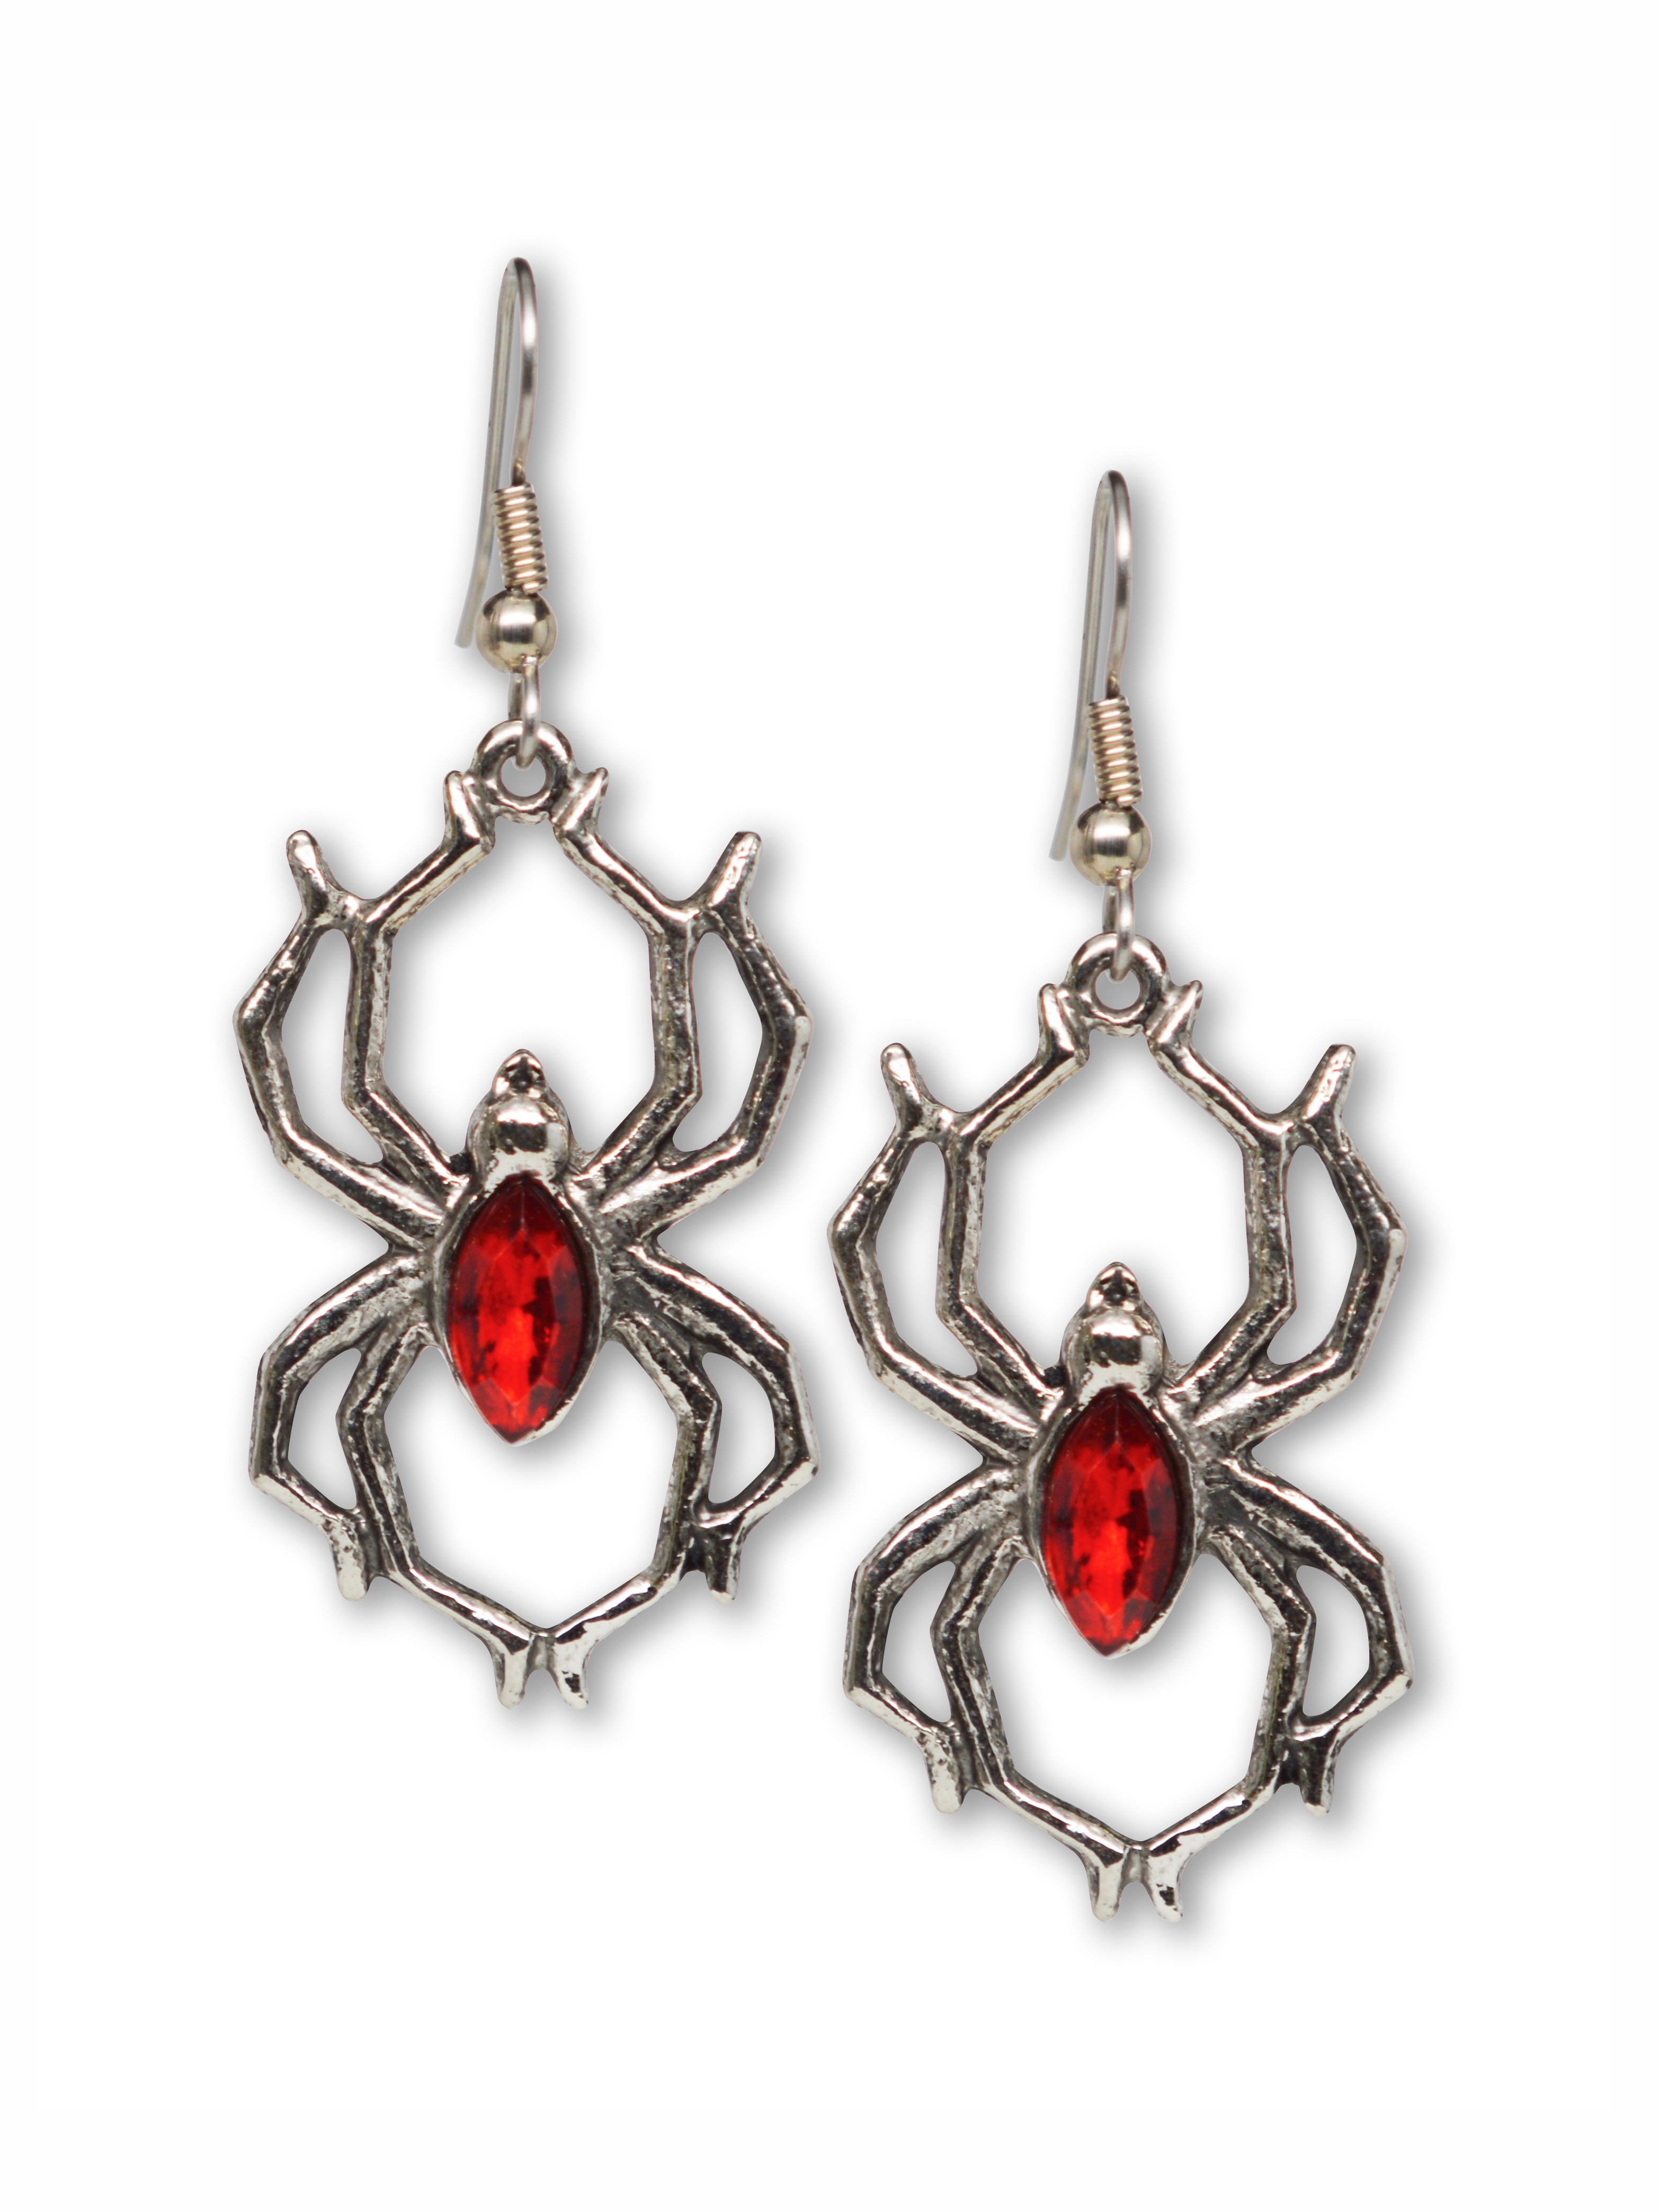 Gothic Spider Dangle Earrings with Red Stone Body Silver Finish Pewter by Real Metal #952R